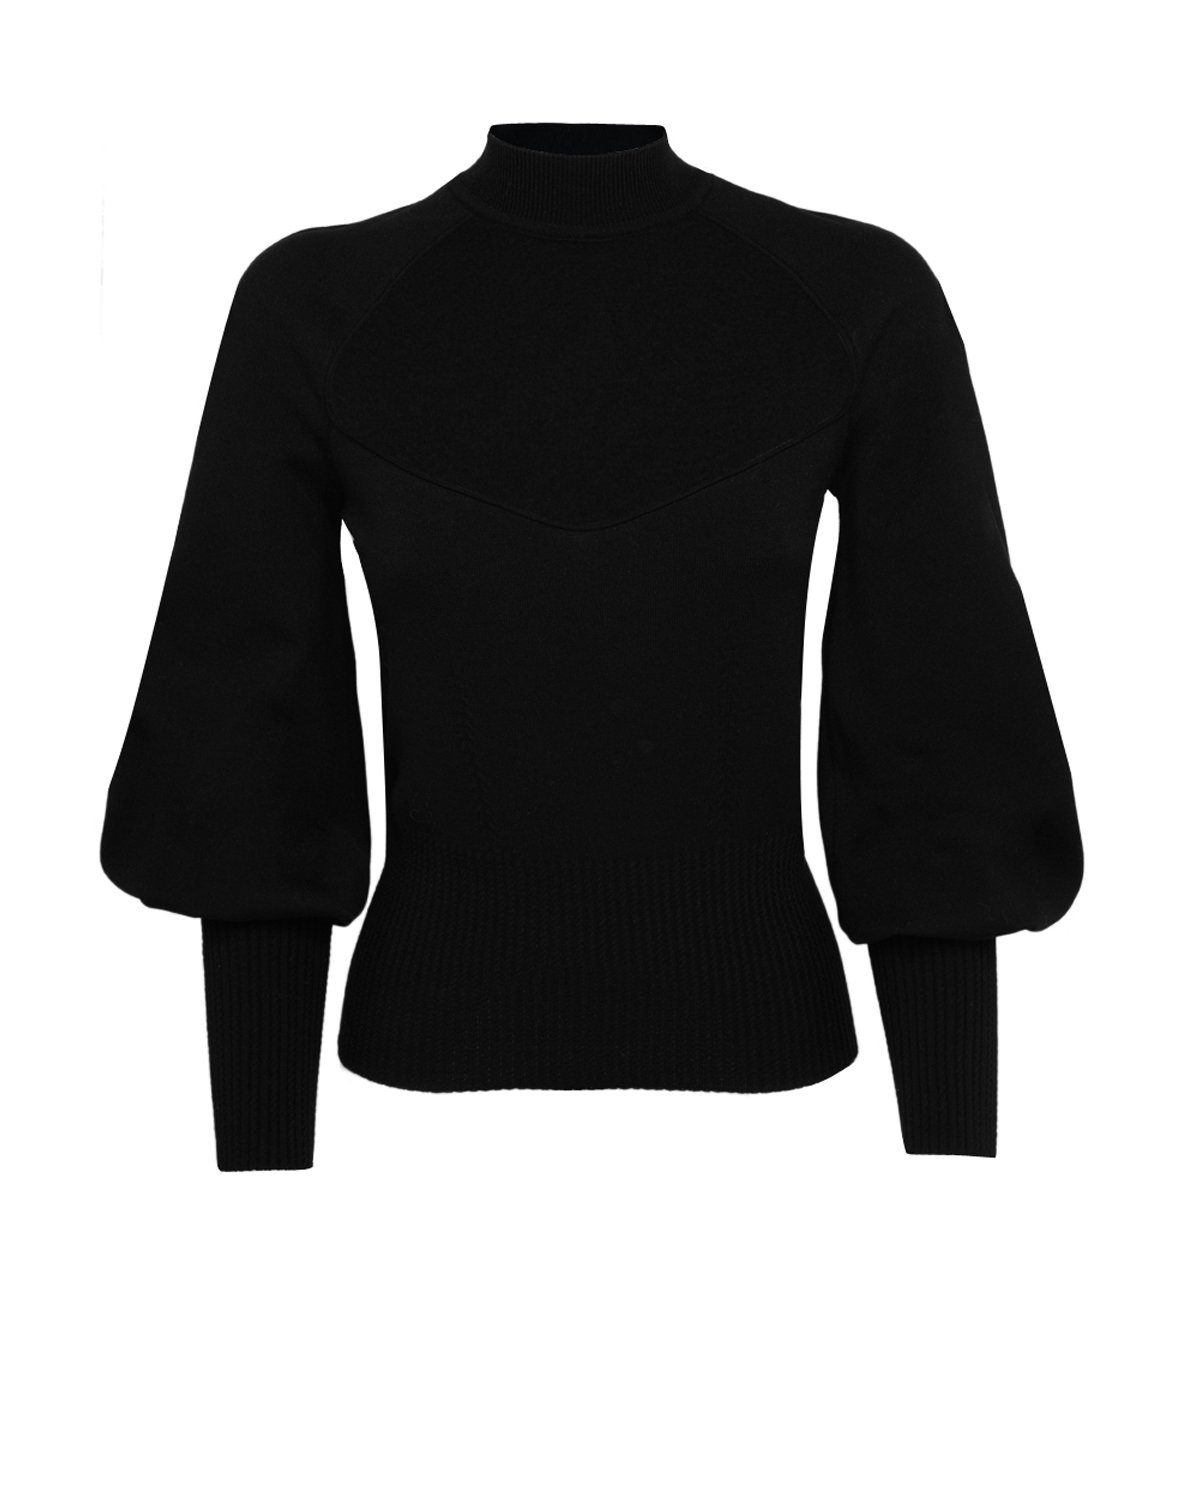 Black high neck sweater | Knit to Know | Genny